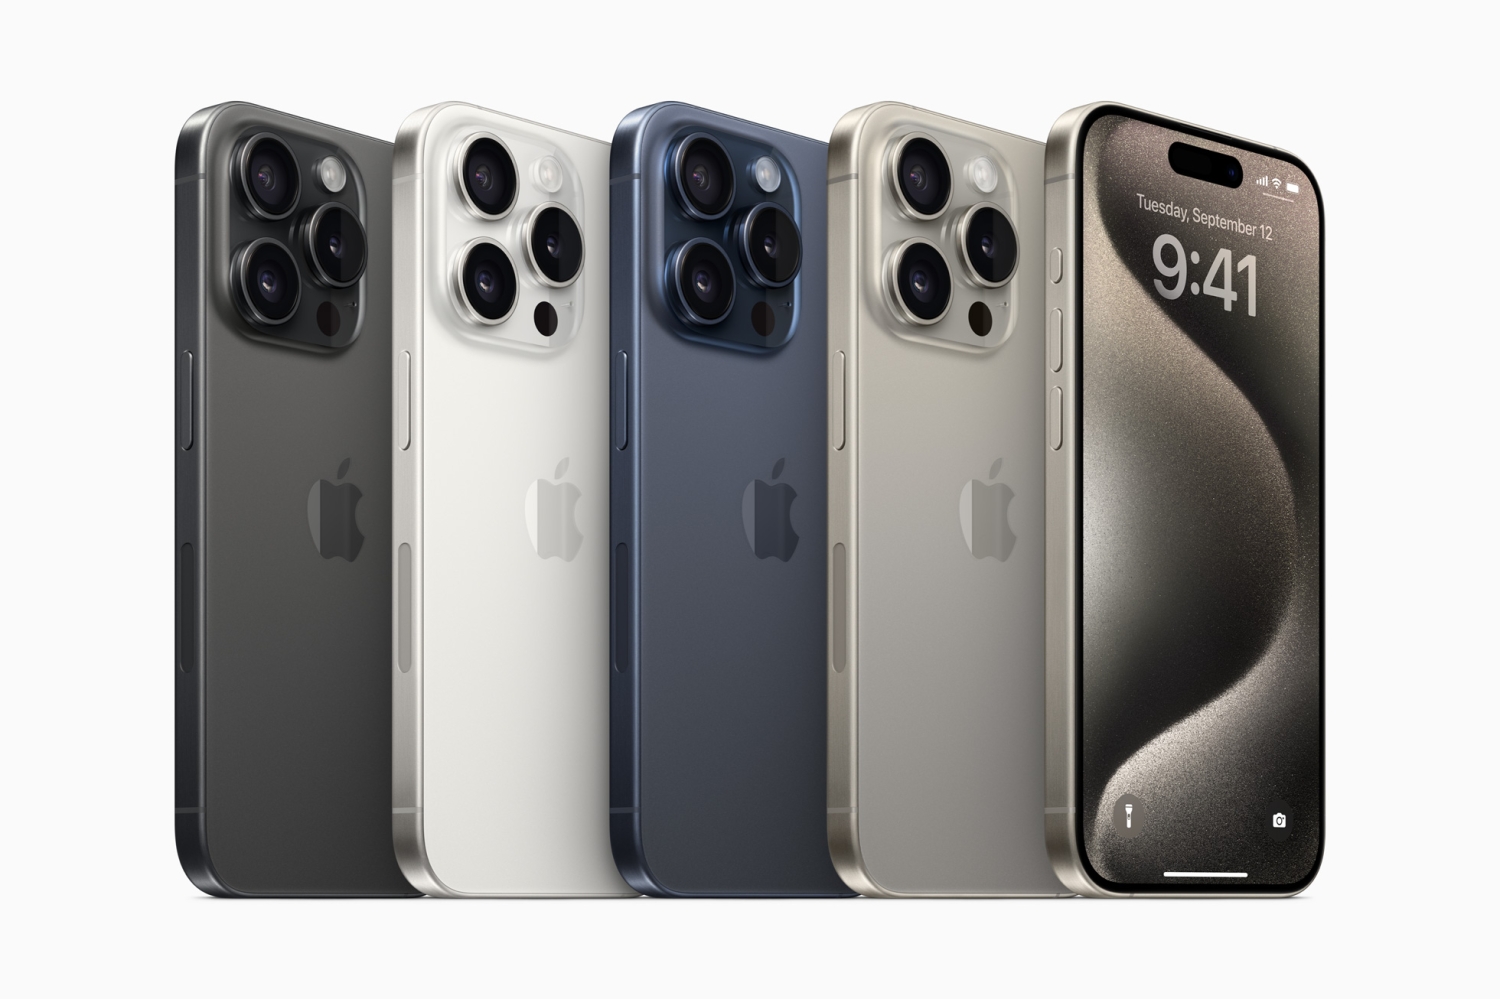 iPhone 16 Pro series to offer up to 2TB storage and larger batteries -   news